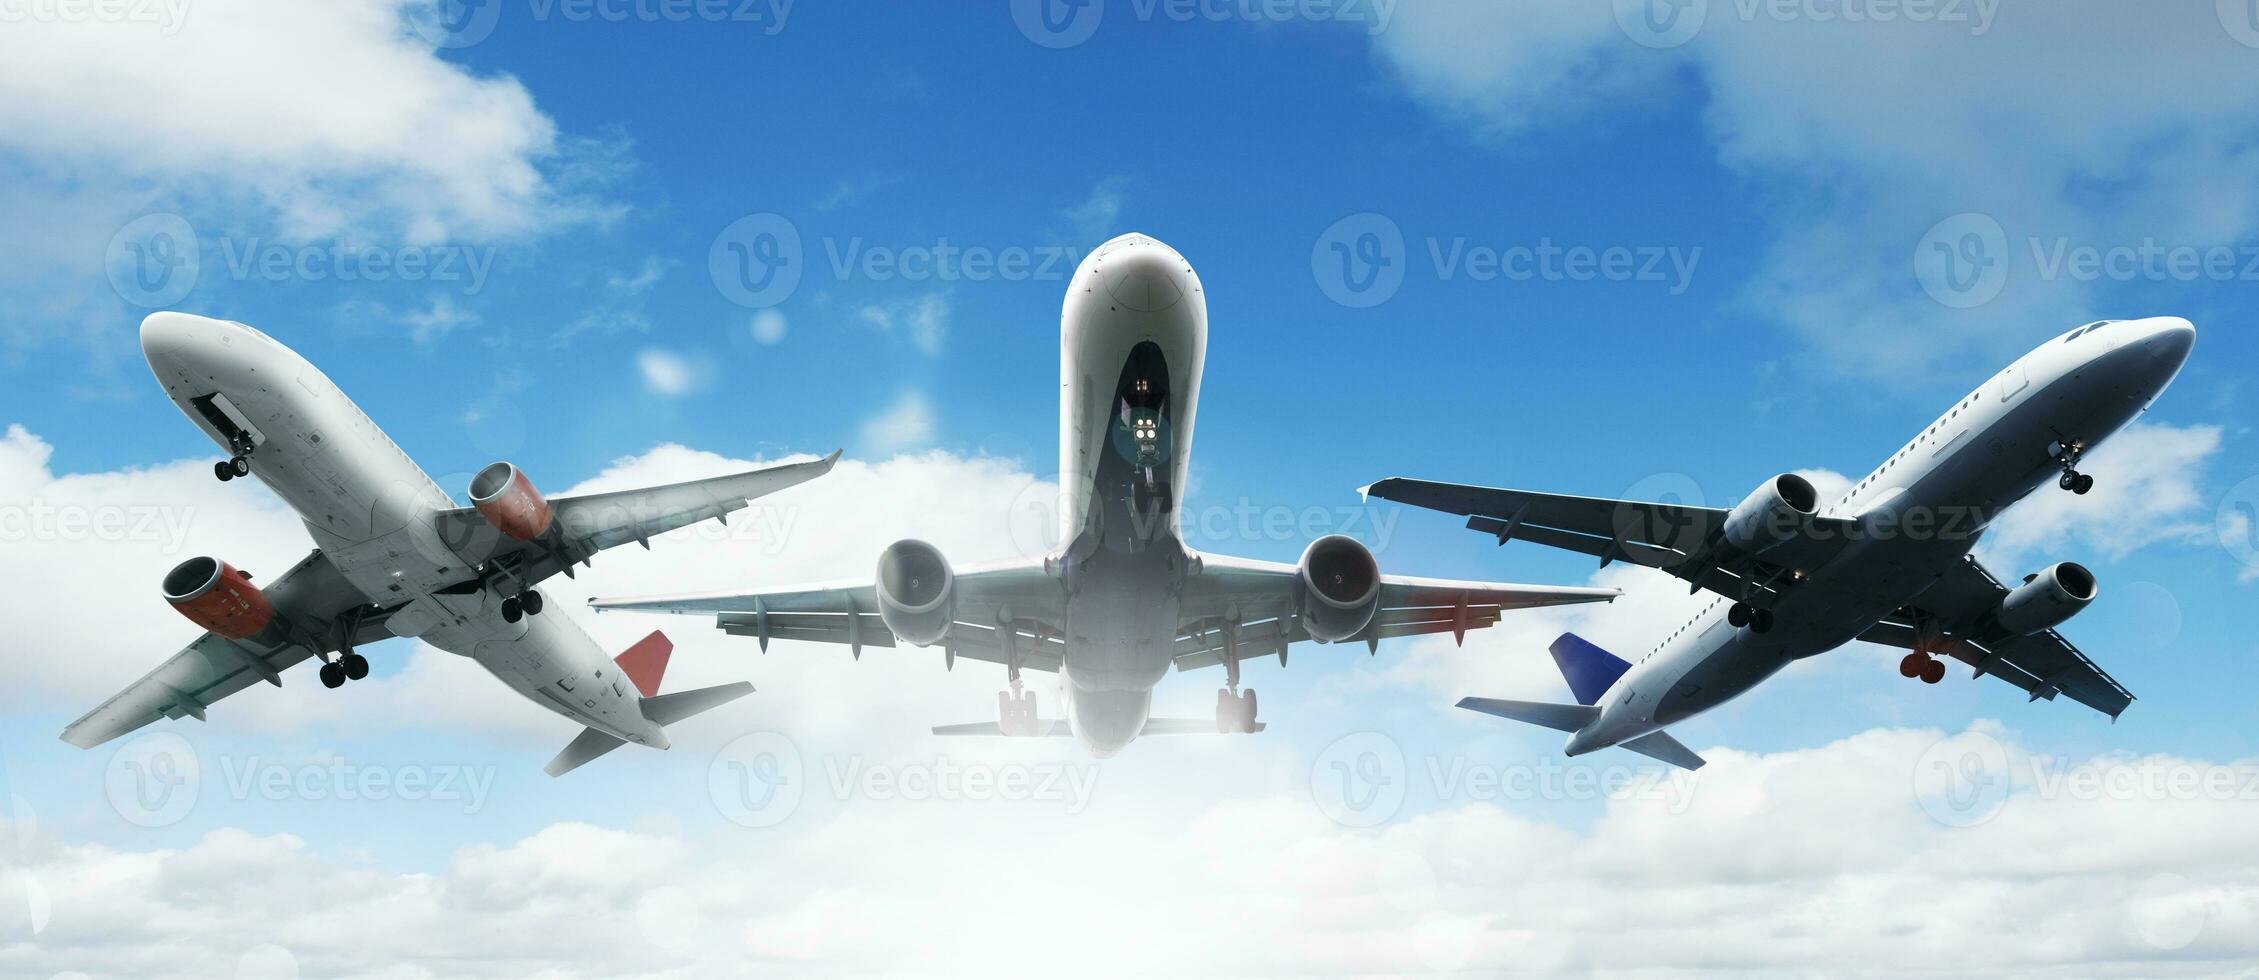 Summer holiday and traveling concept with aircrafts in the sky photo